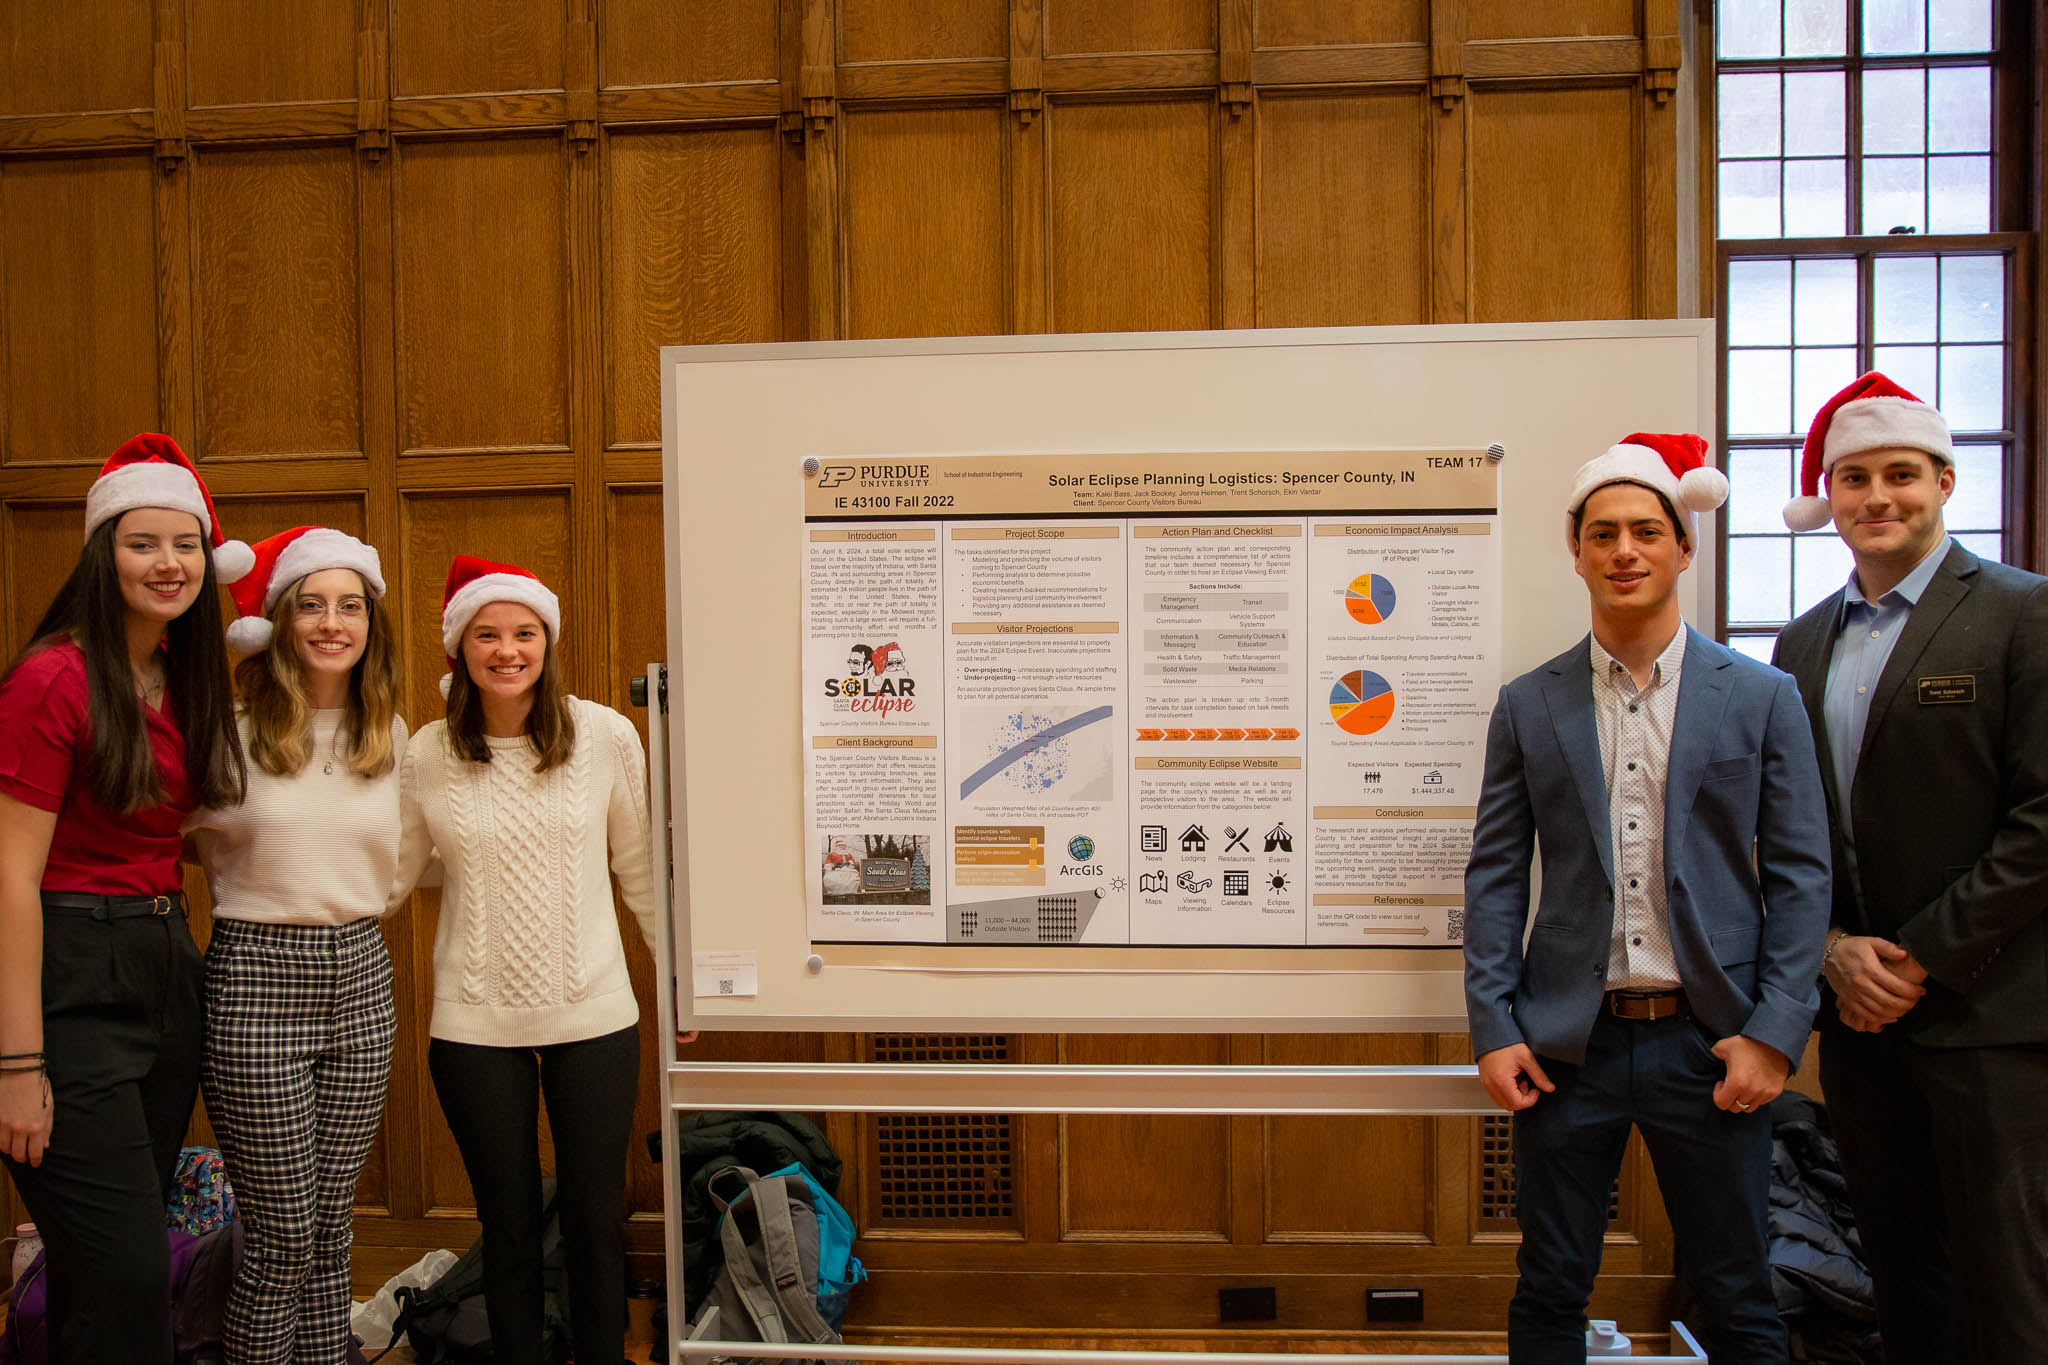 Team 17 wears festive Santa hats, as their project involved Santa Claus, Indiana.